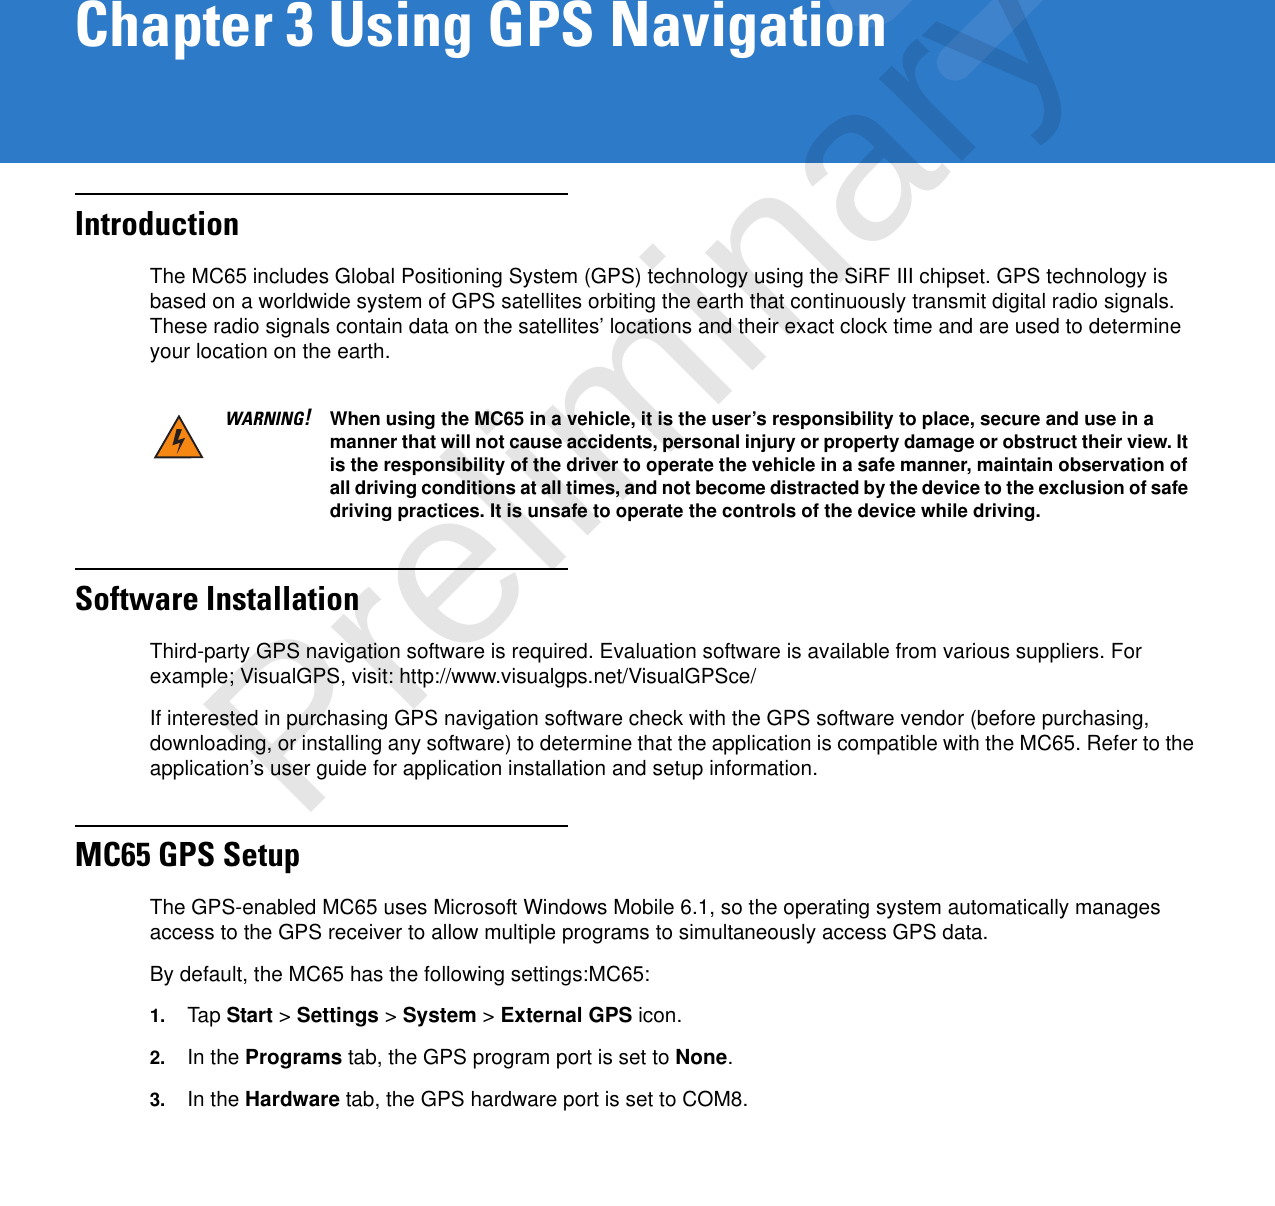 Chapter 3 Using GPS NavigationIntroductionThe MC65 includes Global Positioning System (GPS) technology using the SiRF III chipset. GPS technology is based on a worldwide system of GPS satellites orbiting the earth that continuously transmit digital radio signals. These radio signals contain data on the satellites’ locations and their exact clock time and are used to determine your location on the earth.Software InstallationThird-party GPS navigation software is required. Evaluation software is available from various suppliers. For example; VisualGPS, visit: http://www.visualgps.net/VisualGPSce/If interested in purchasing GPS navigation software check with the GPS software vendor (before purchasing, downloading, or installing any software) to determine that the application is compatible with the MC65. Refer to the application’s user guide for application installation and setup information.MC65 GPS SetupThe GPS-enabled MC65 uses Microsoft Windows Mobile 6.1, so the operating system automatically manages access to the GPS receiver to allow multiple programs to simultaneously access GPS data.By default, the MC65 has the following settings:MC65:1. Tap Start &gt; Settings &gt; System &gt; External GPS icon.2. In the Programs tab, the GPS program port is set to None.3. In the Hardware tab, the GPS hardware port is set to COM8.WARNING!When using the MC65 in a vehicle, it is the user’s responsibility to place, secure and use in a manner that will not cause accidents, personal injury or property damage or obstruct their view. It is the responsibility of the driver to operate the vehicle in a safe manner, maintain observation of all driving conditions at all times, and not become distracted by the device to the exclusion of safe driving practices. It is unsafe to operate the controls of the device while driving.Preliminary